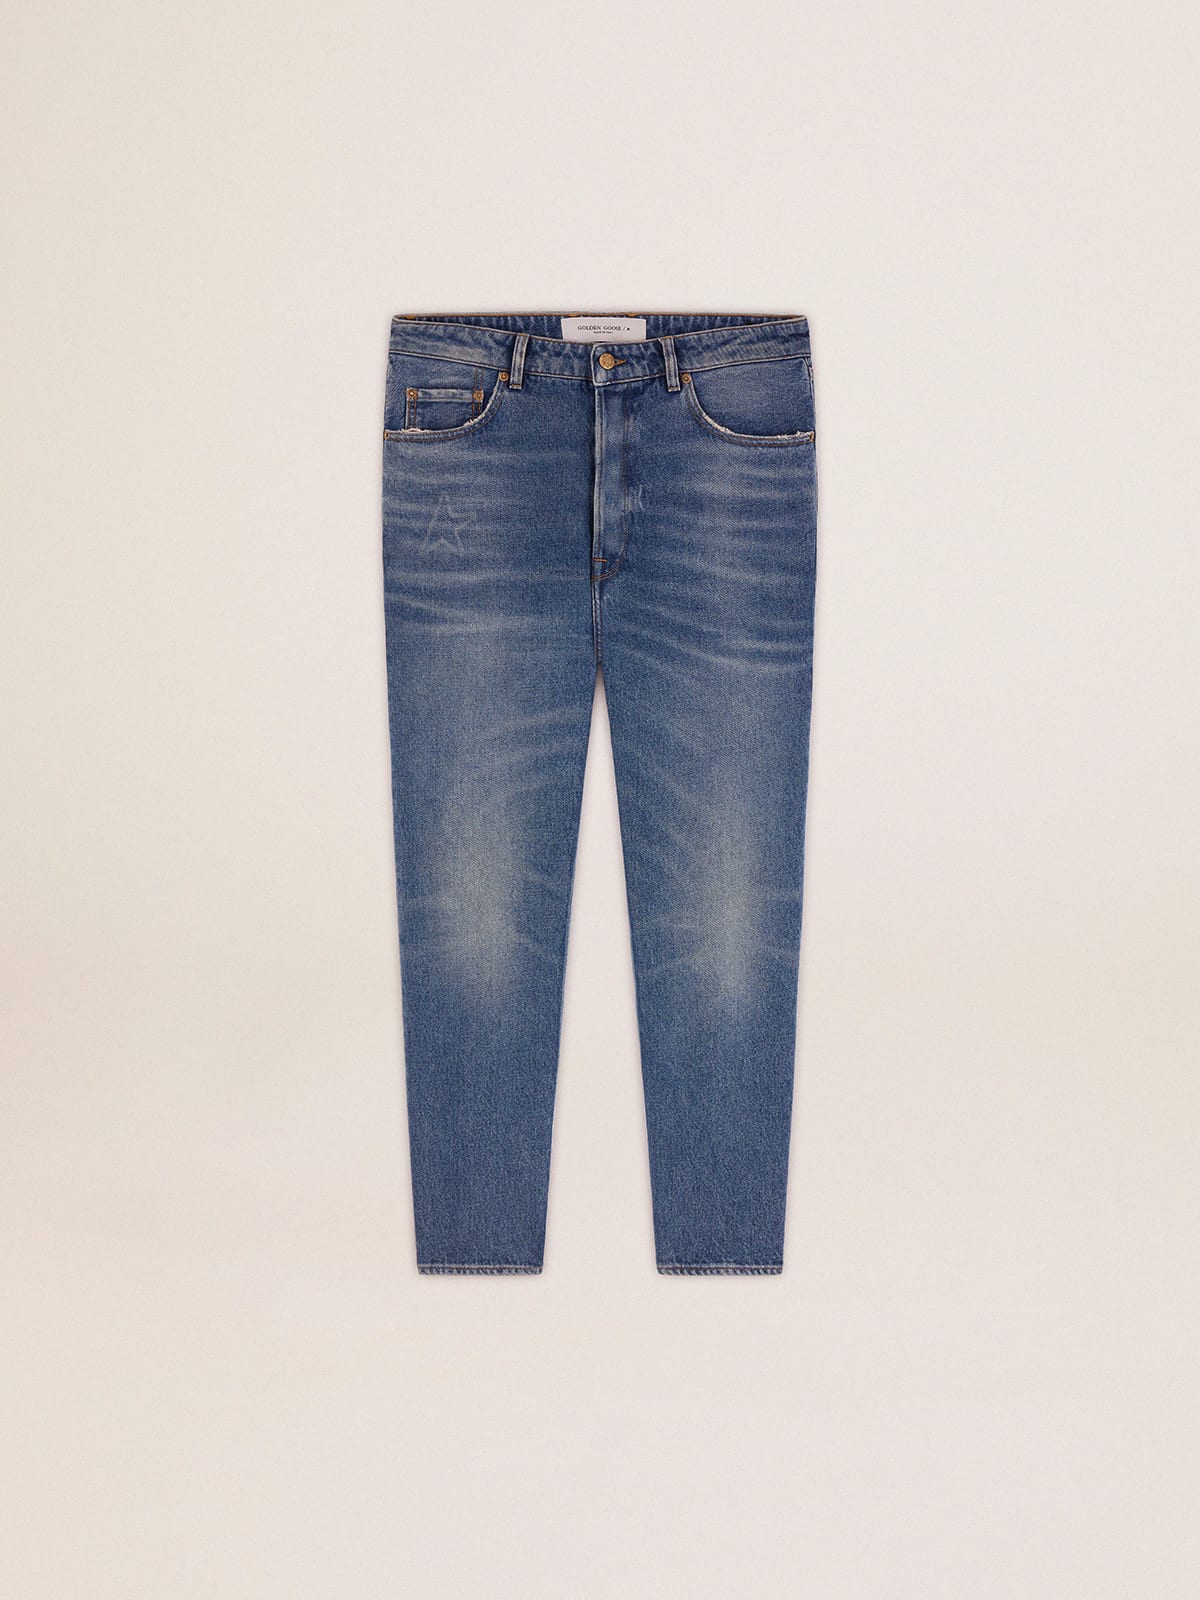 Golden Collection slim-fit jeans with a medium wash